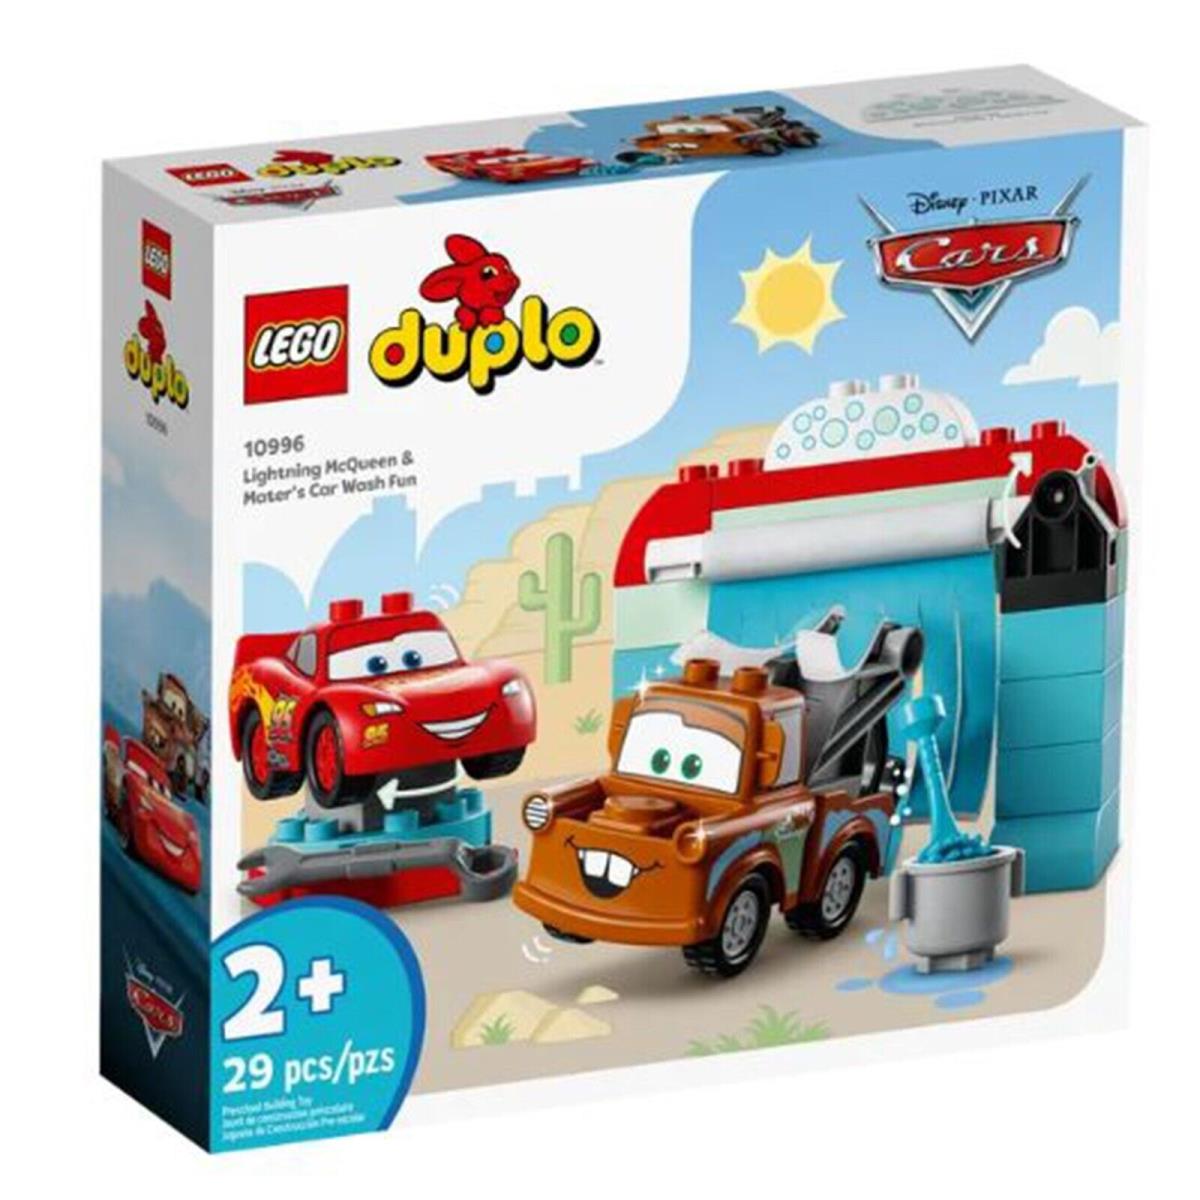 Lego Duplo Lightning Mcqueen and Mater`s Car Wash Fun Building Set IN Stock